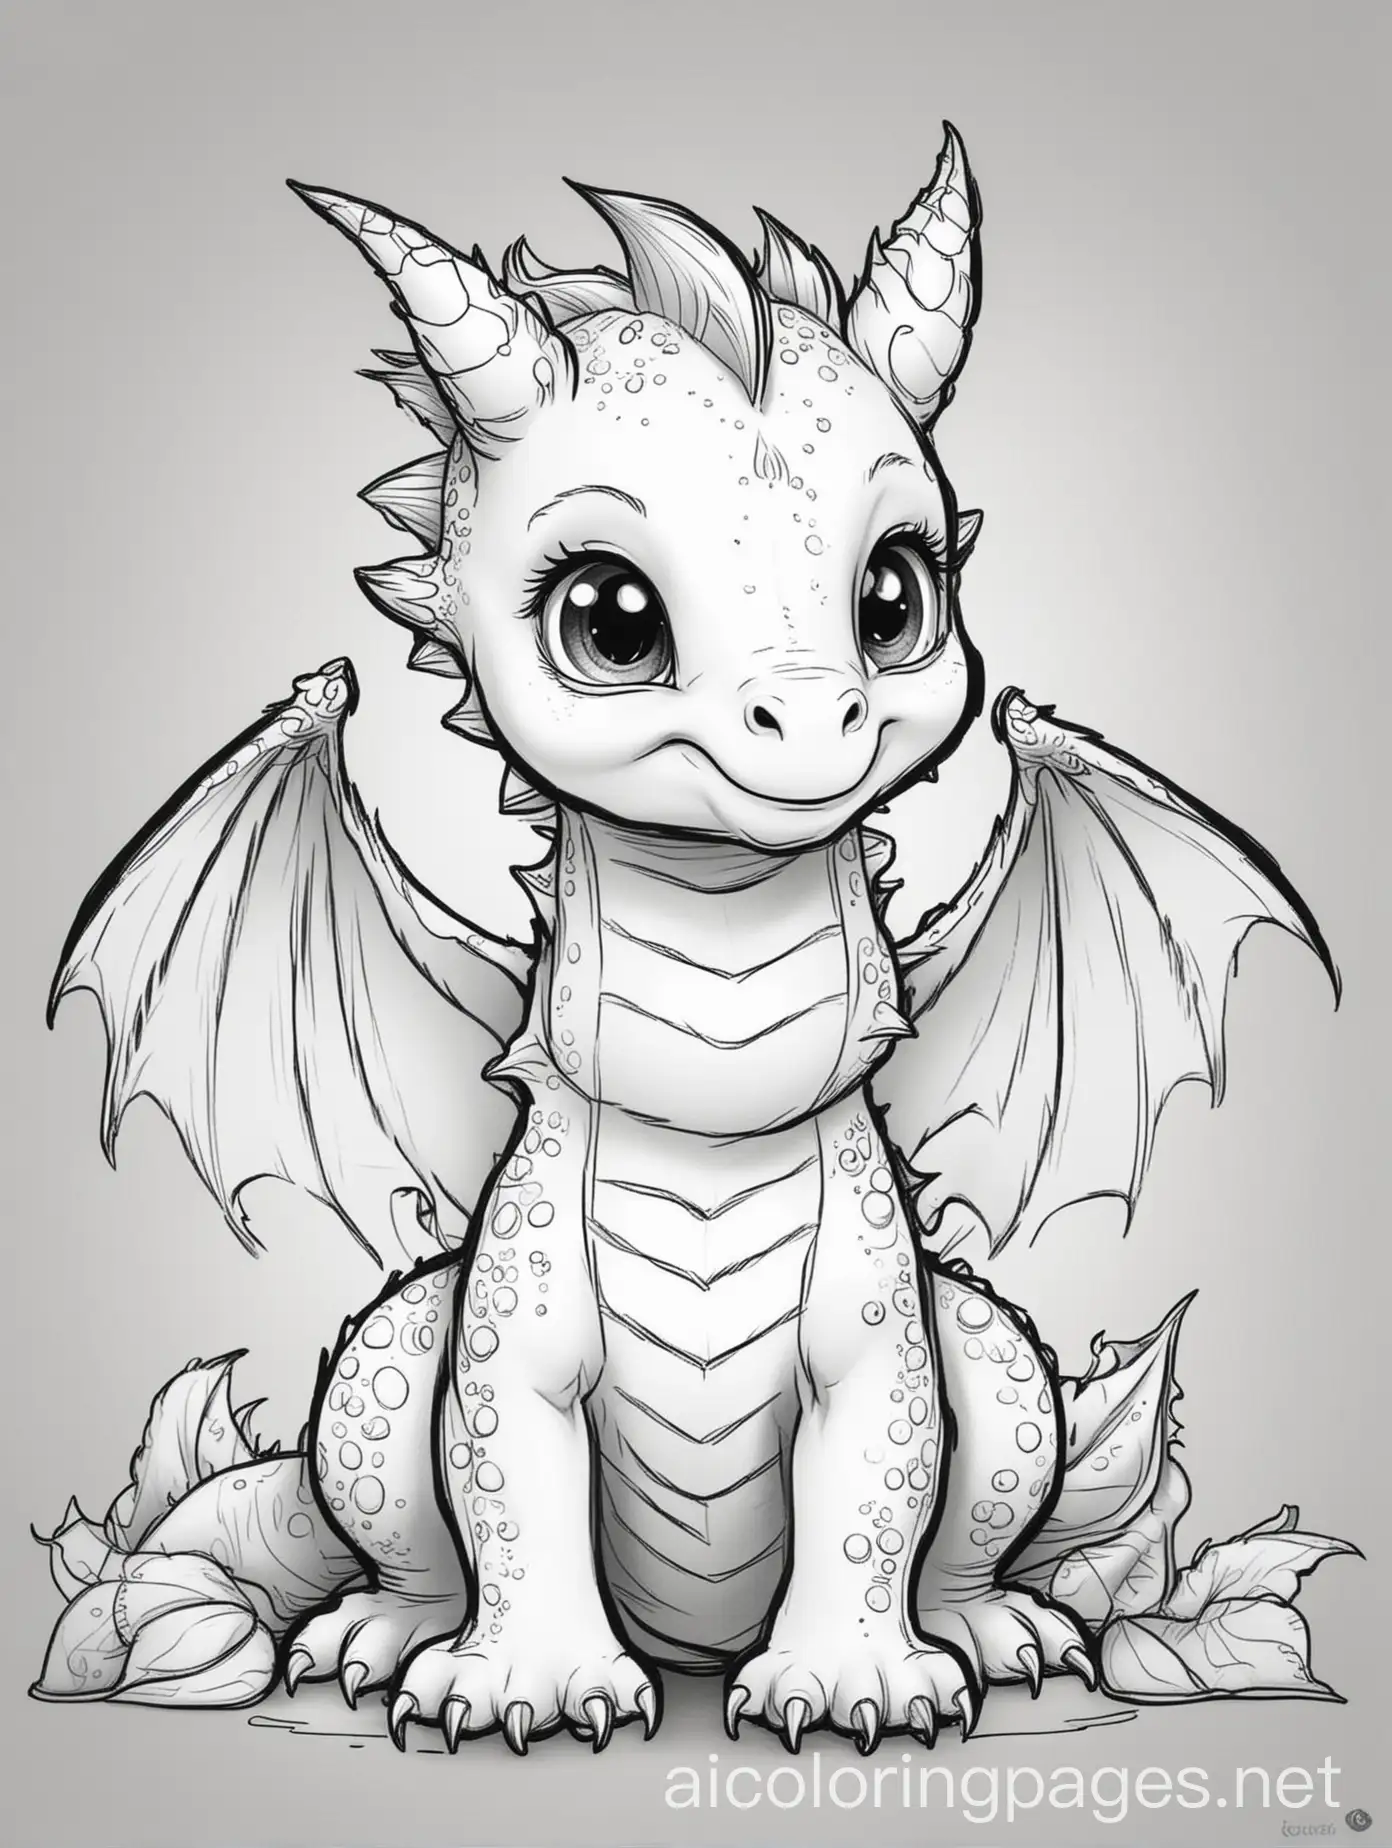 baby dragon, background, line art, black and white, cartoon style, Coloring Page, black and white, line art, white background, Simplicity, Ample White Space. The background of the coloring page is plain white to make it easy for young children to color within the lines. The outlines of all the subjects are easy to distinguish, making it simple for kids to color without too much difficulty